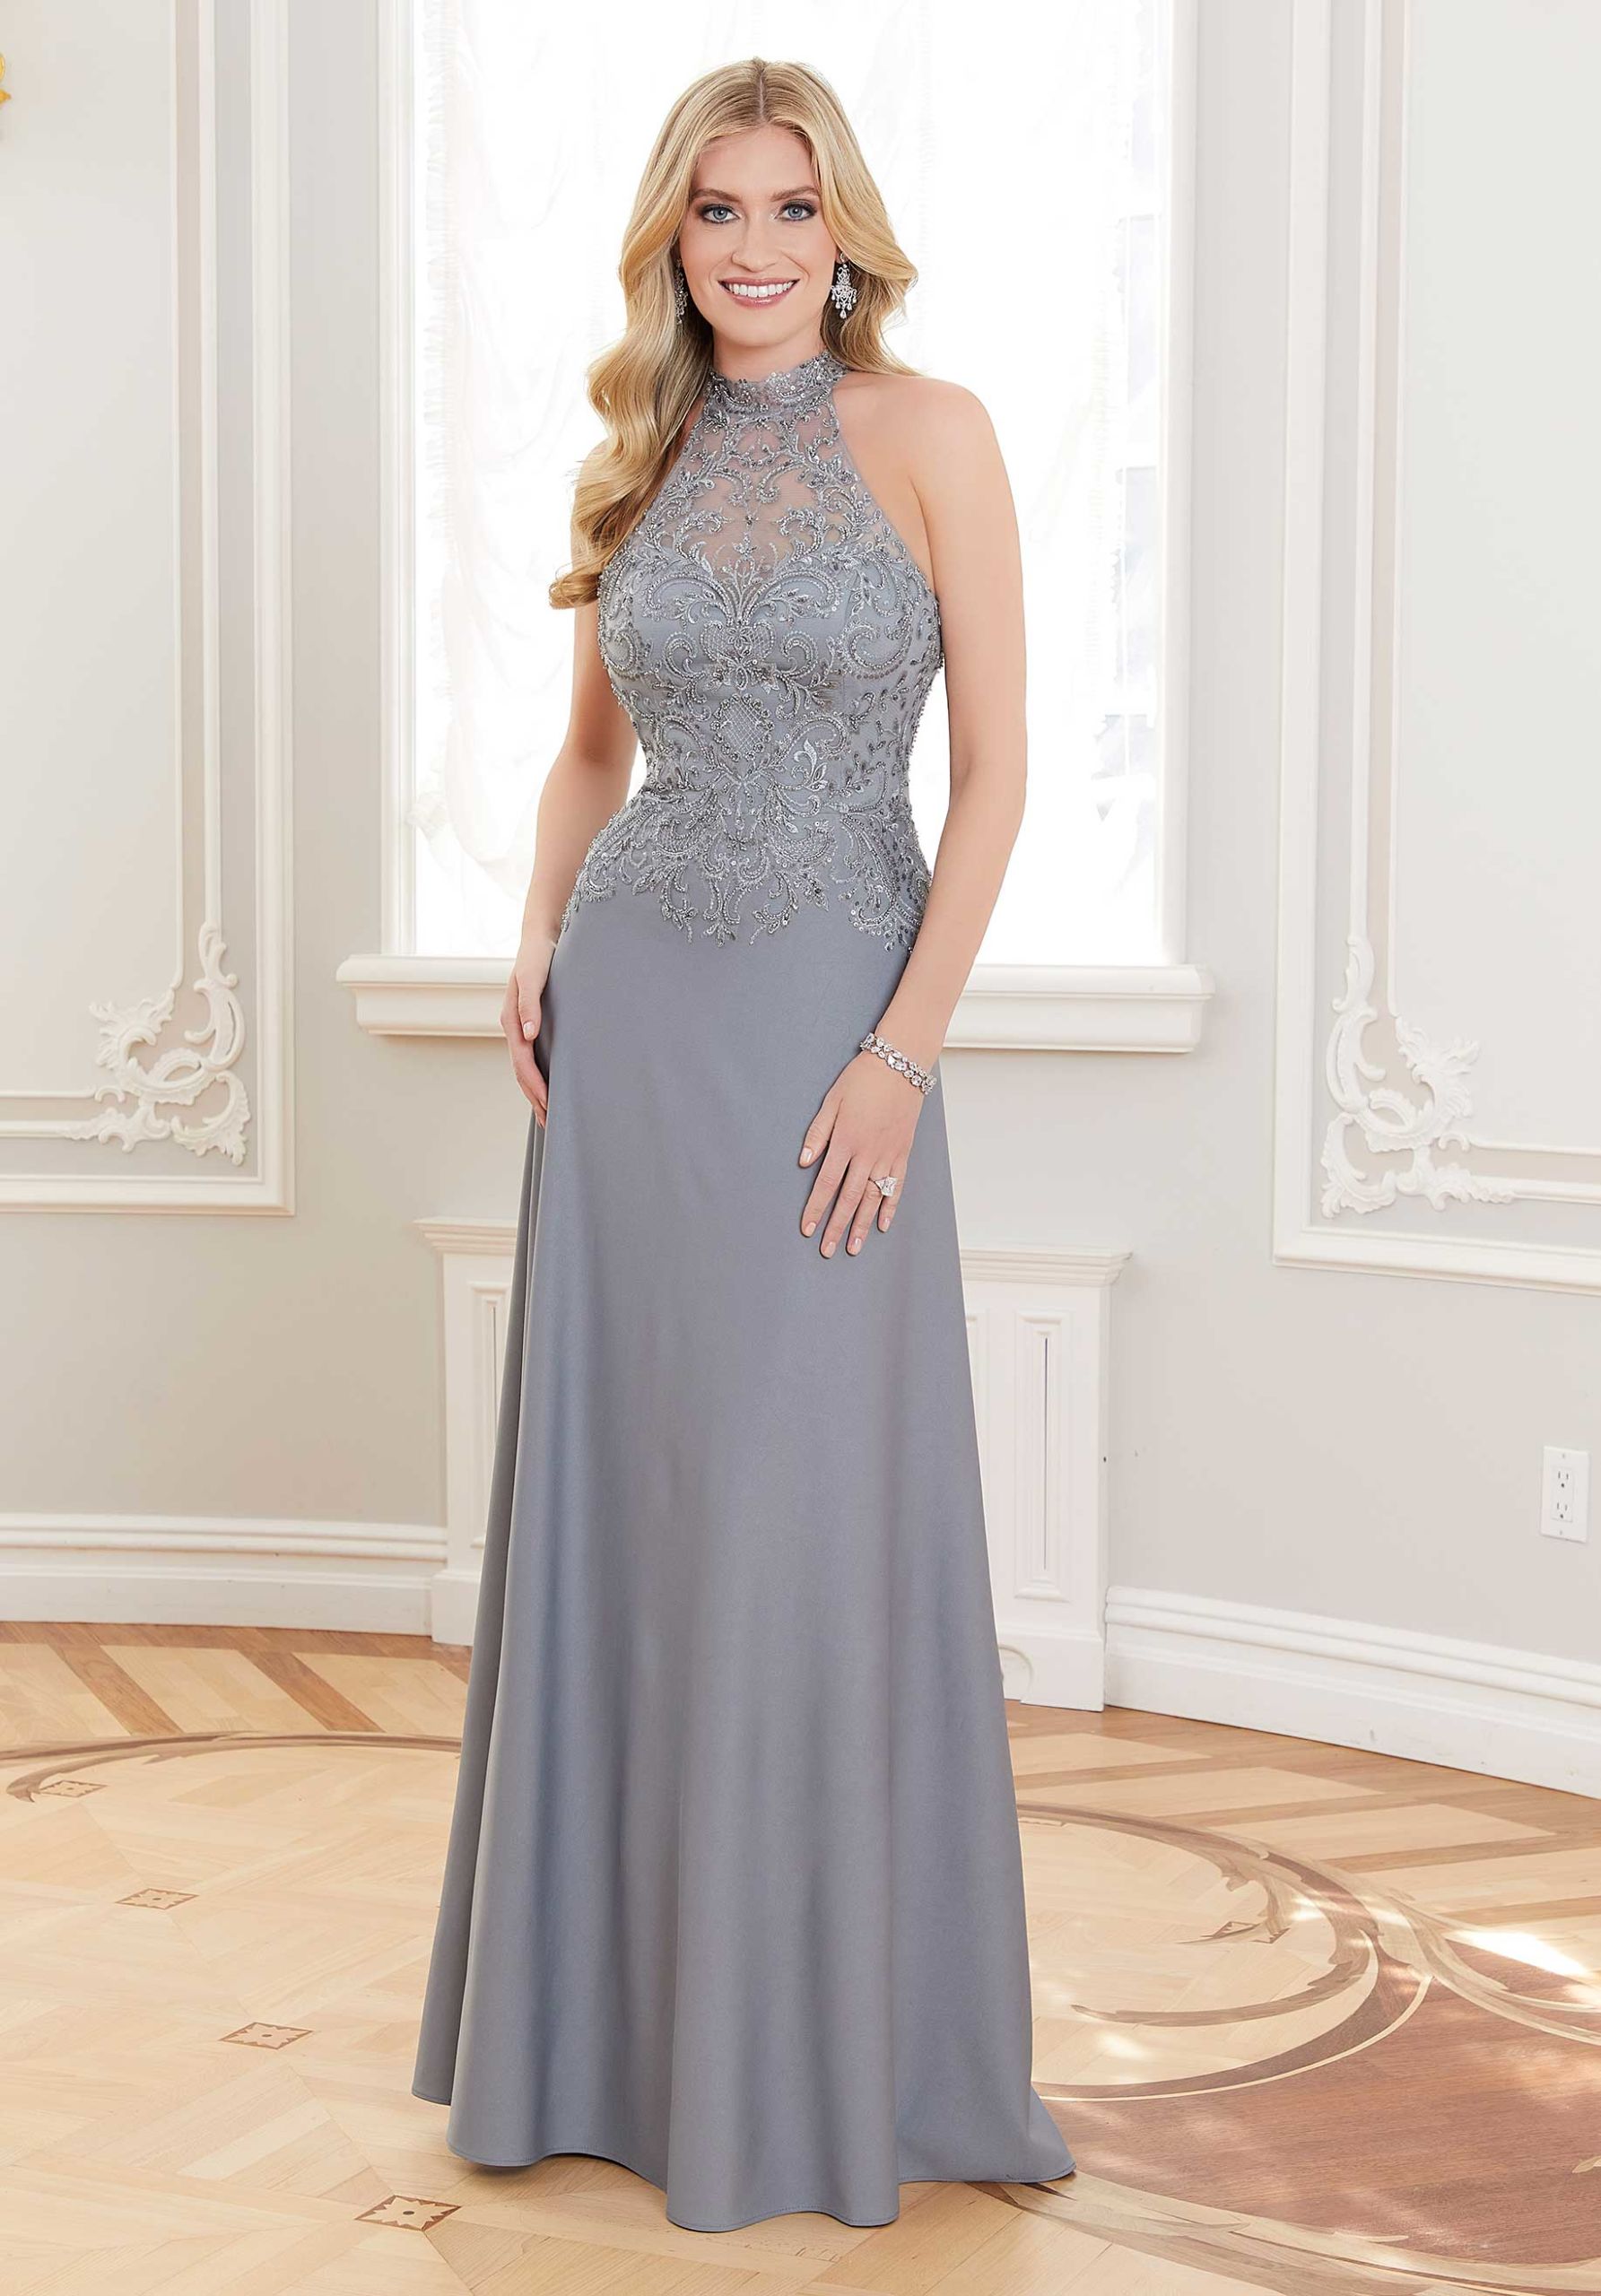 Halter Neck Embroidered Evening Gown Morilee